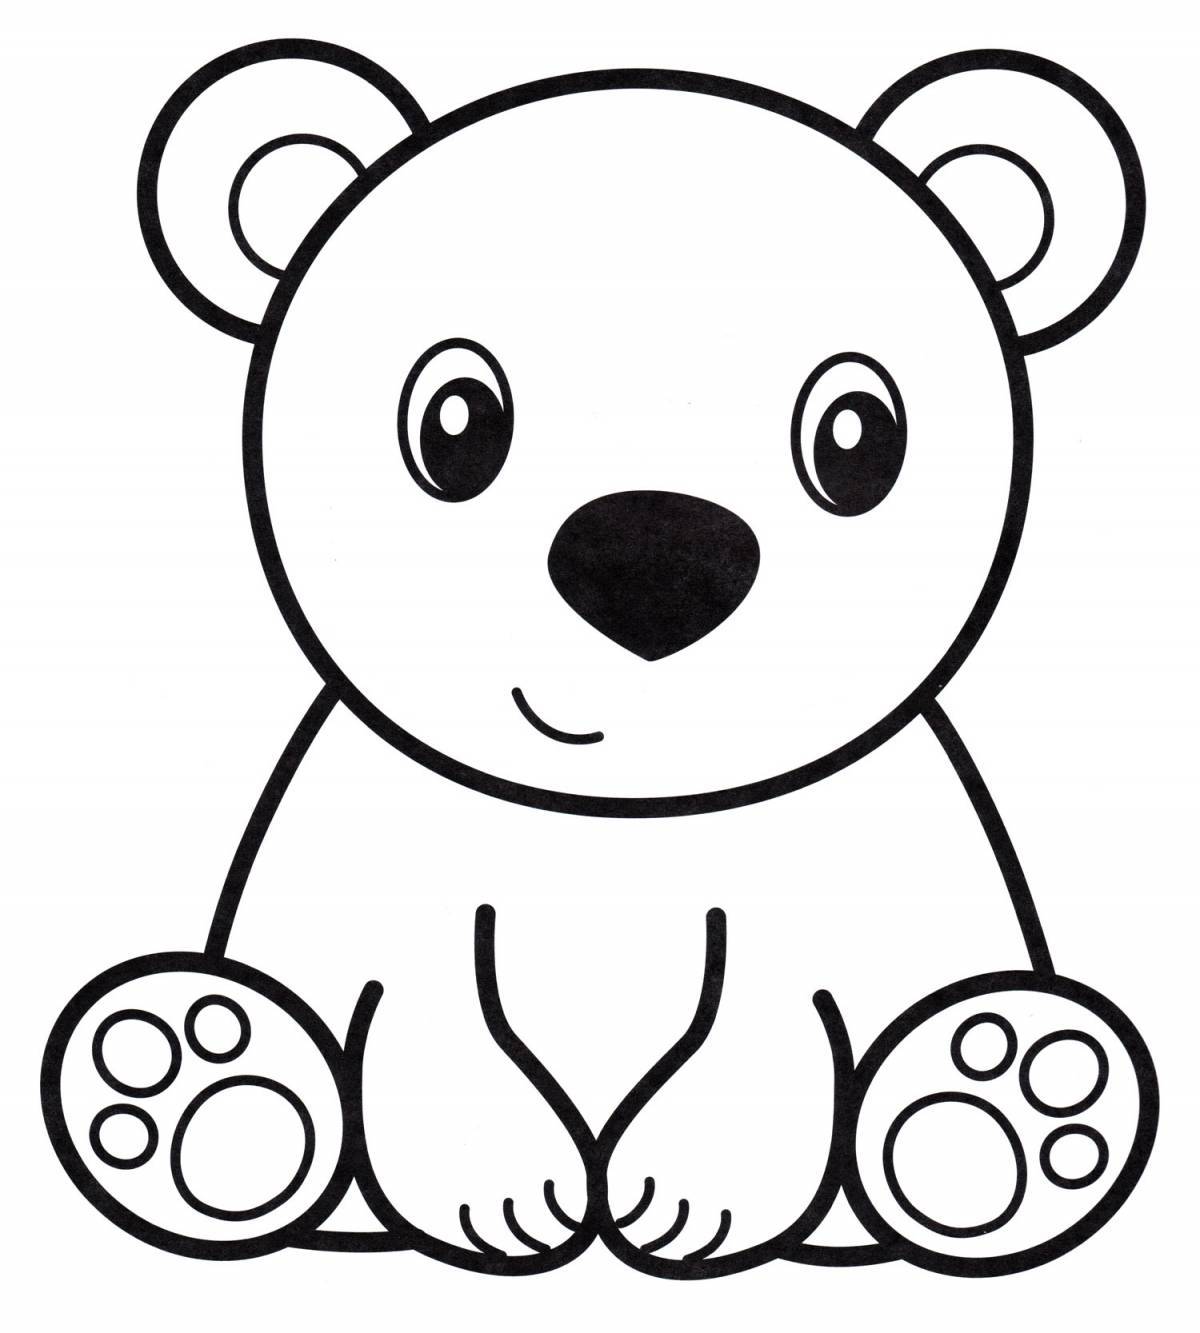 Coloring book of a busy bear for kids